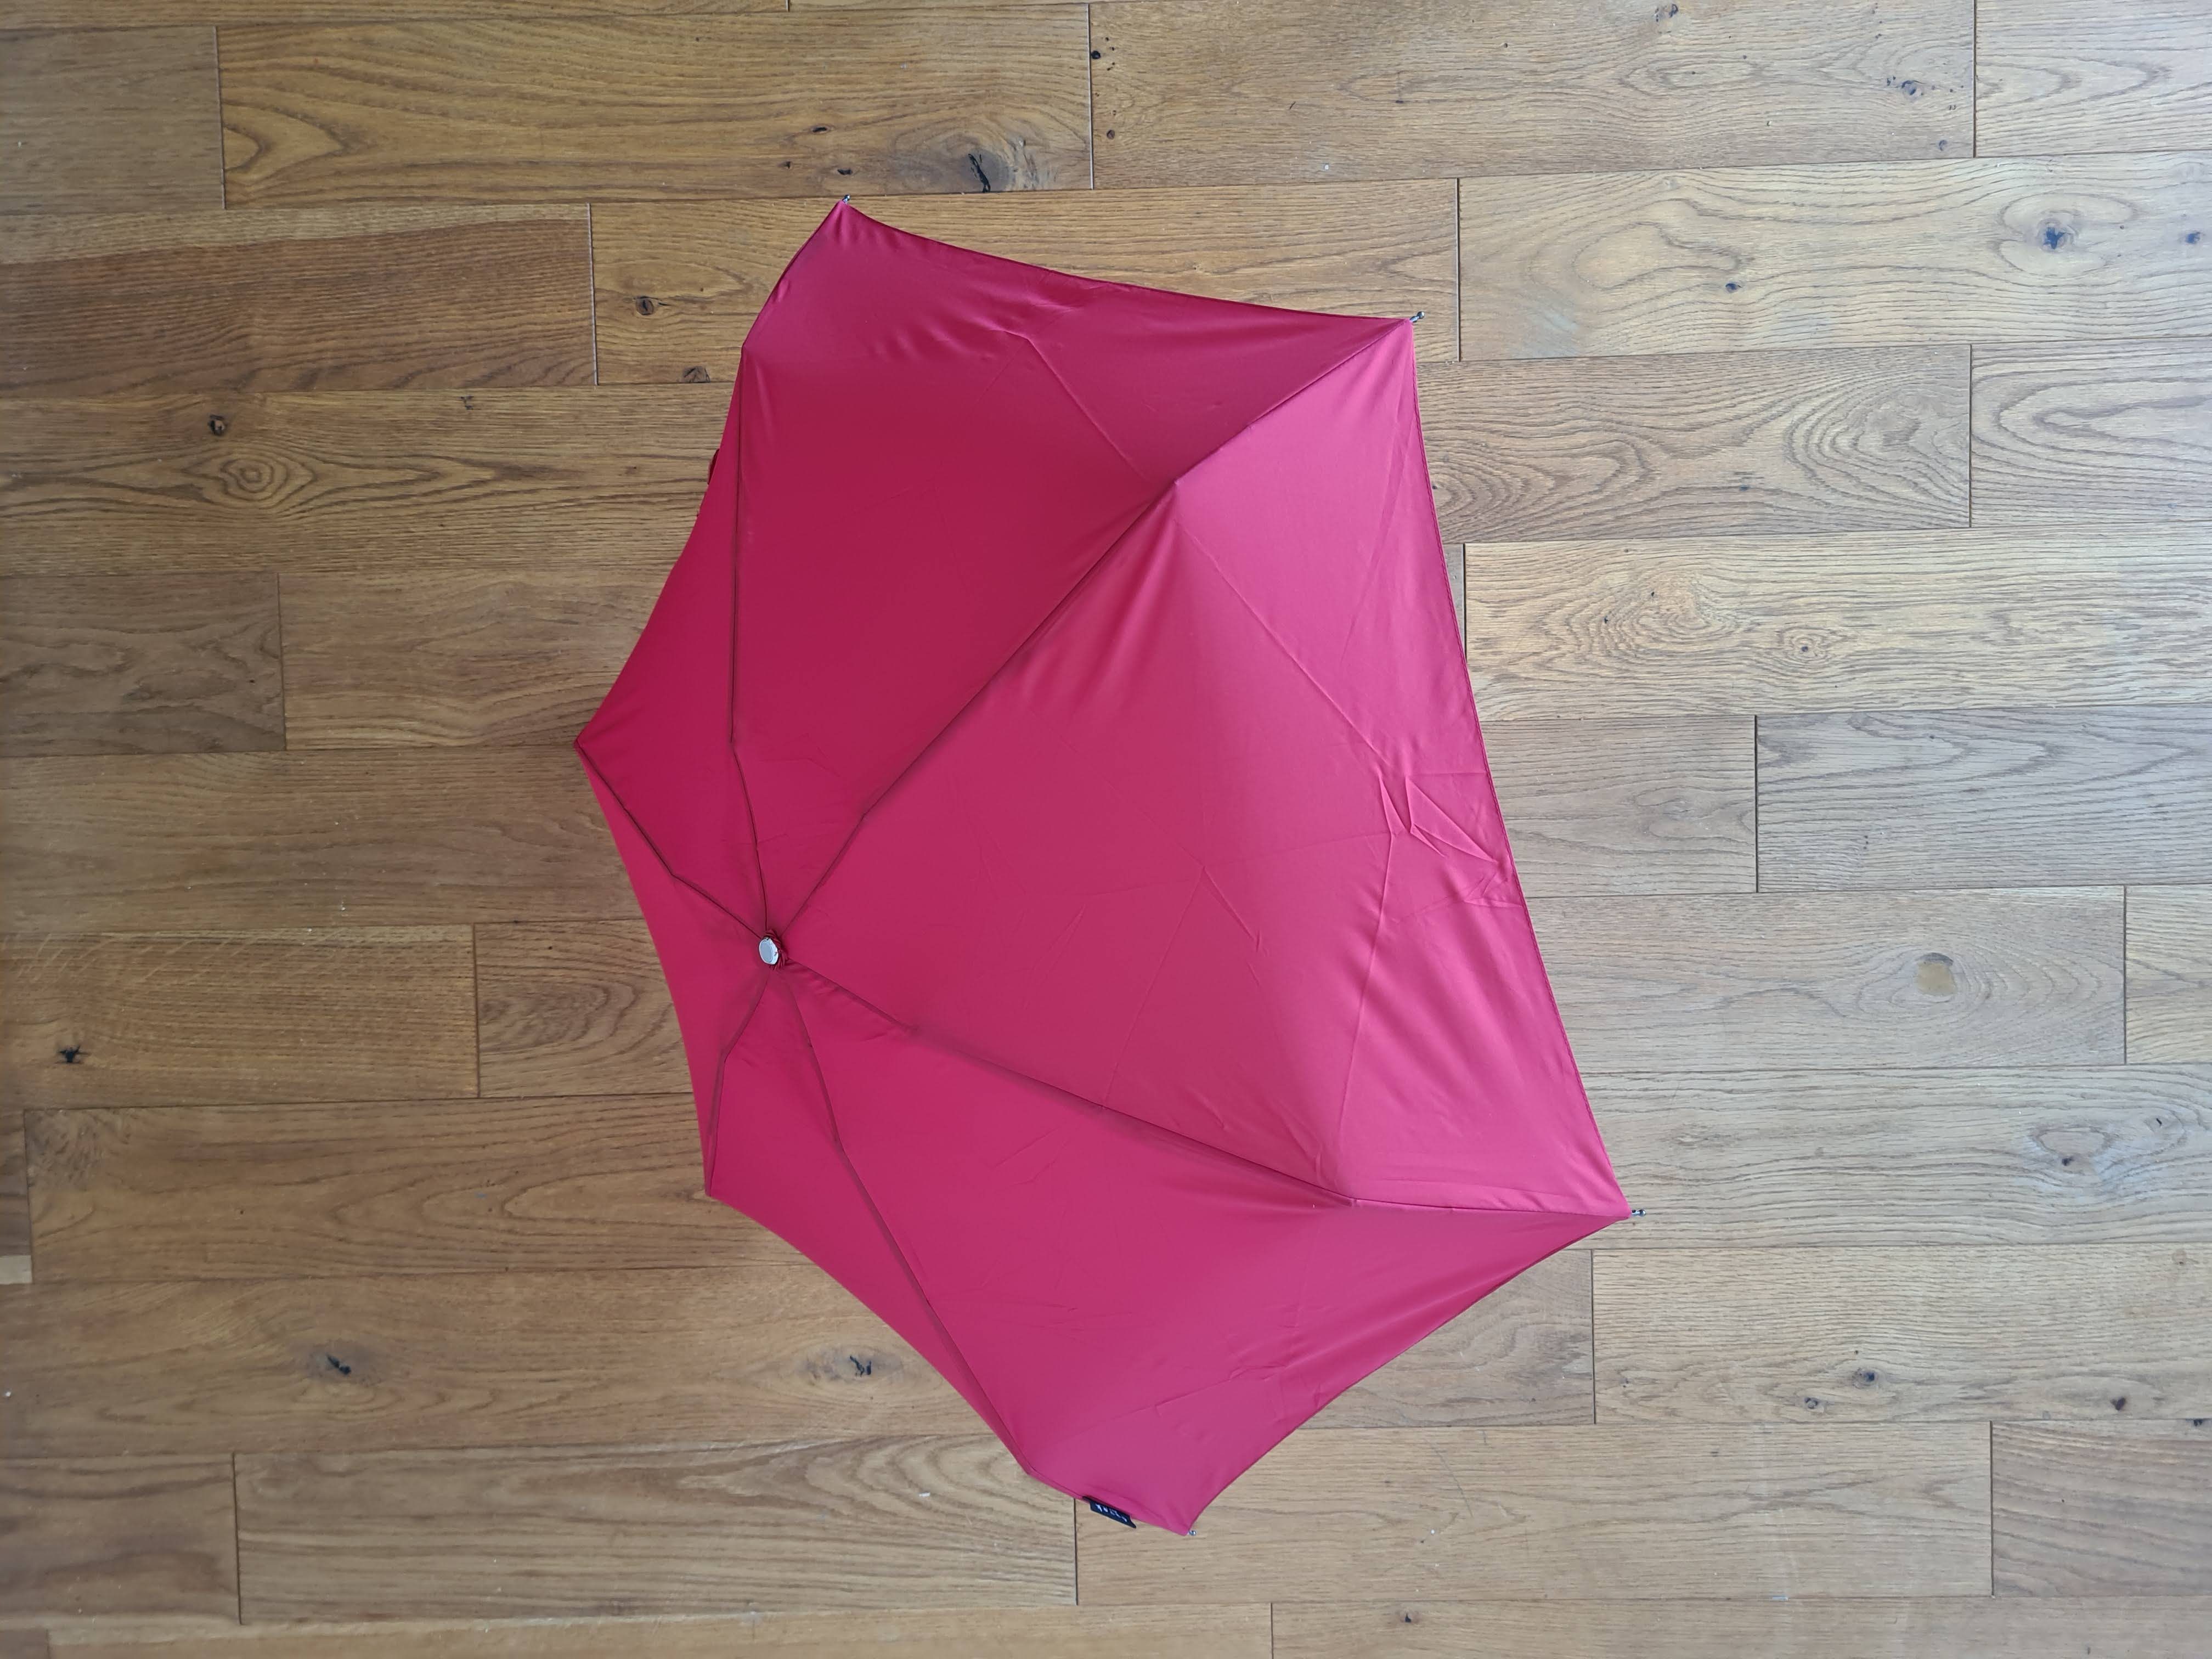 Davek Umbrellas are expensive, but come with lifetime guarantees